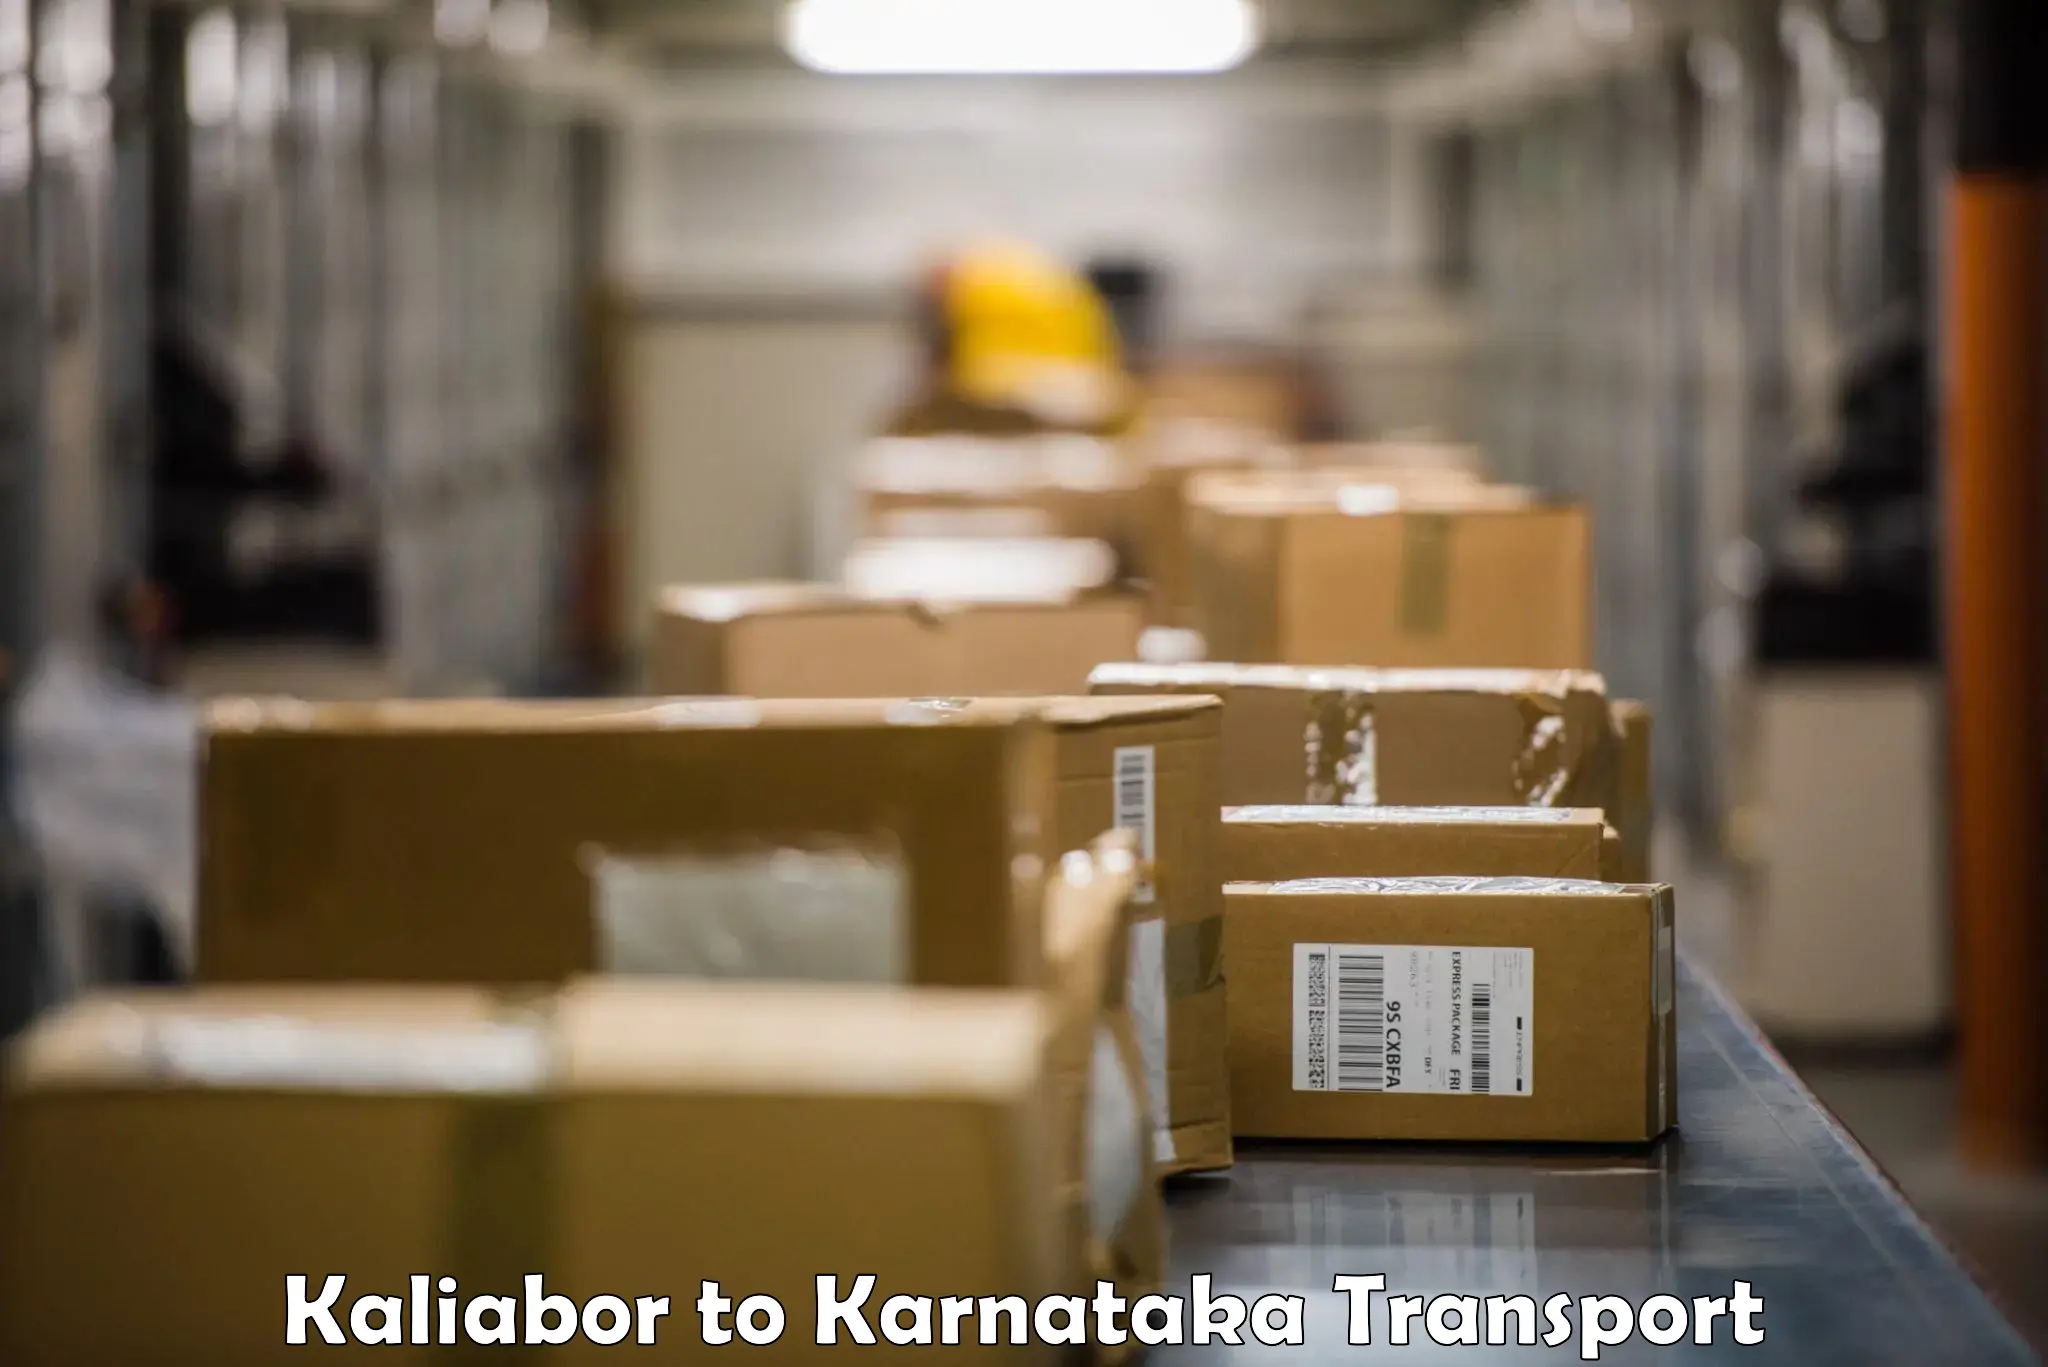 Air freight transport services in Kaliabor to Kodagu